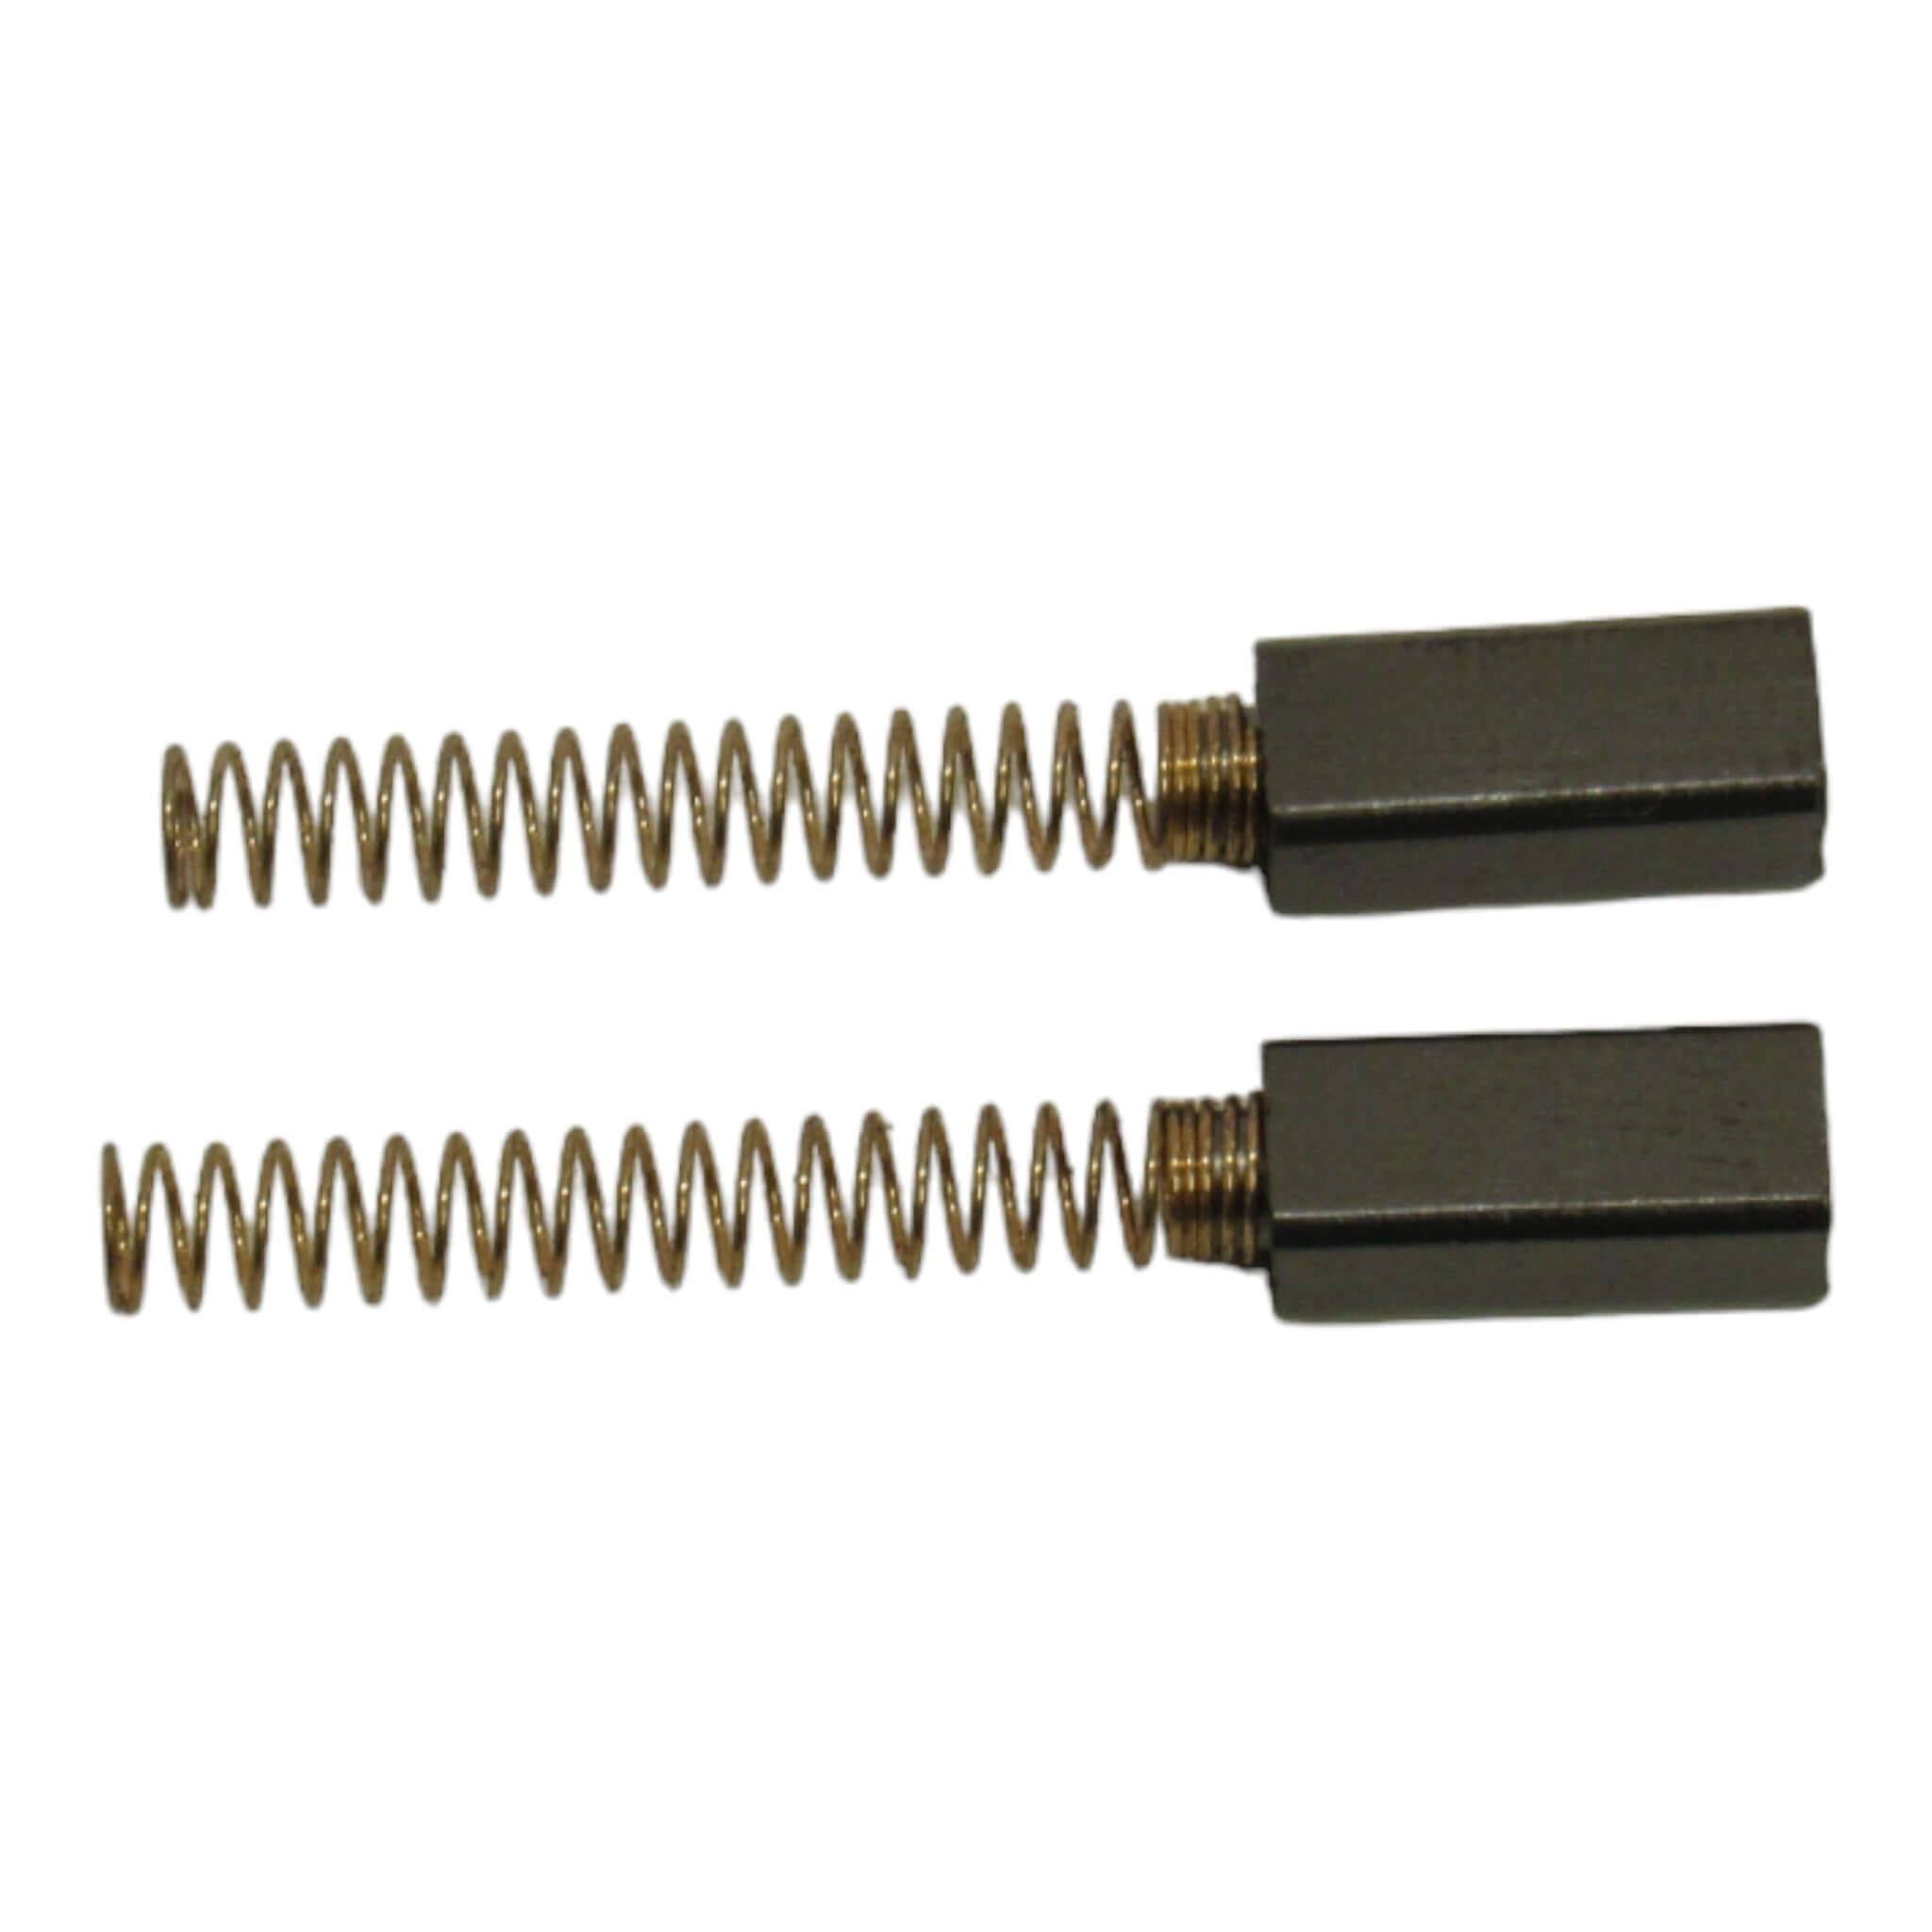 (2) Carbon Motor Brushes Medium Size with Springs 4 mm x 3.5 mm x 13 mm -  Part # YM4013-P